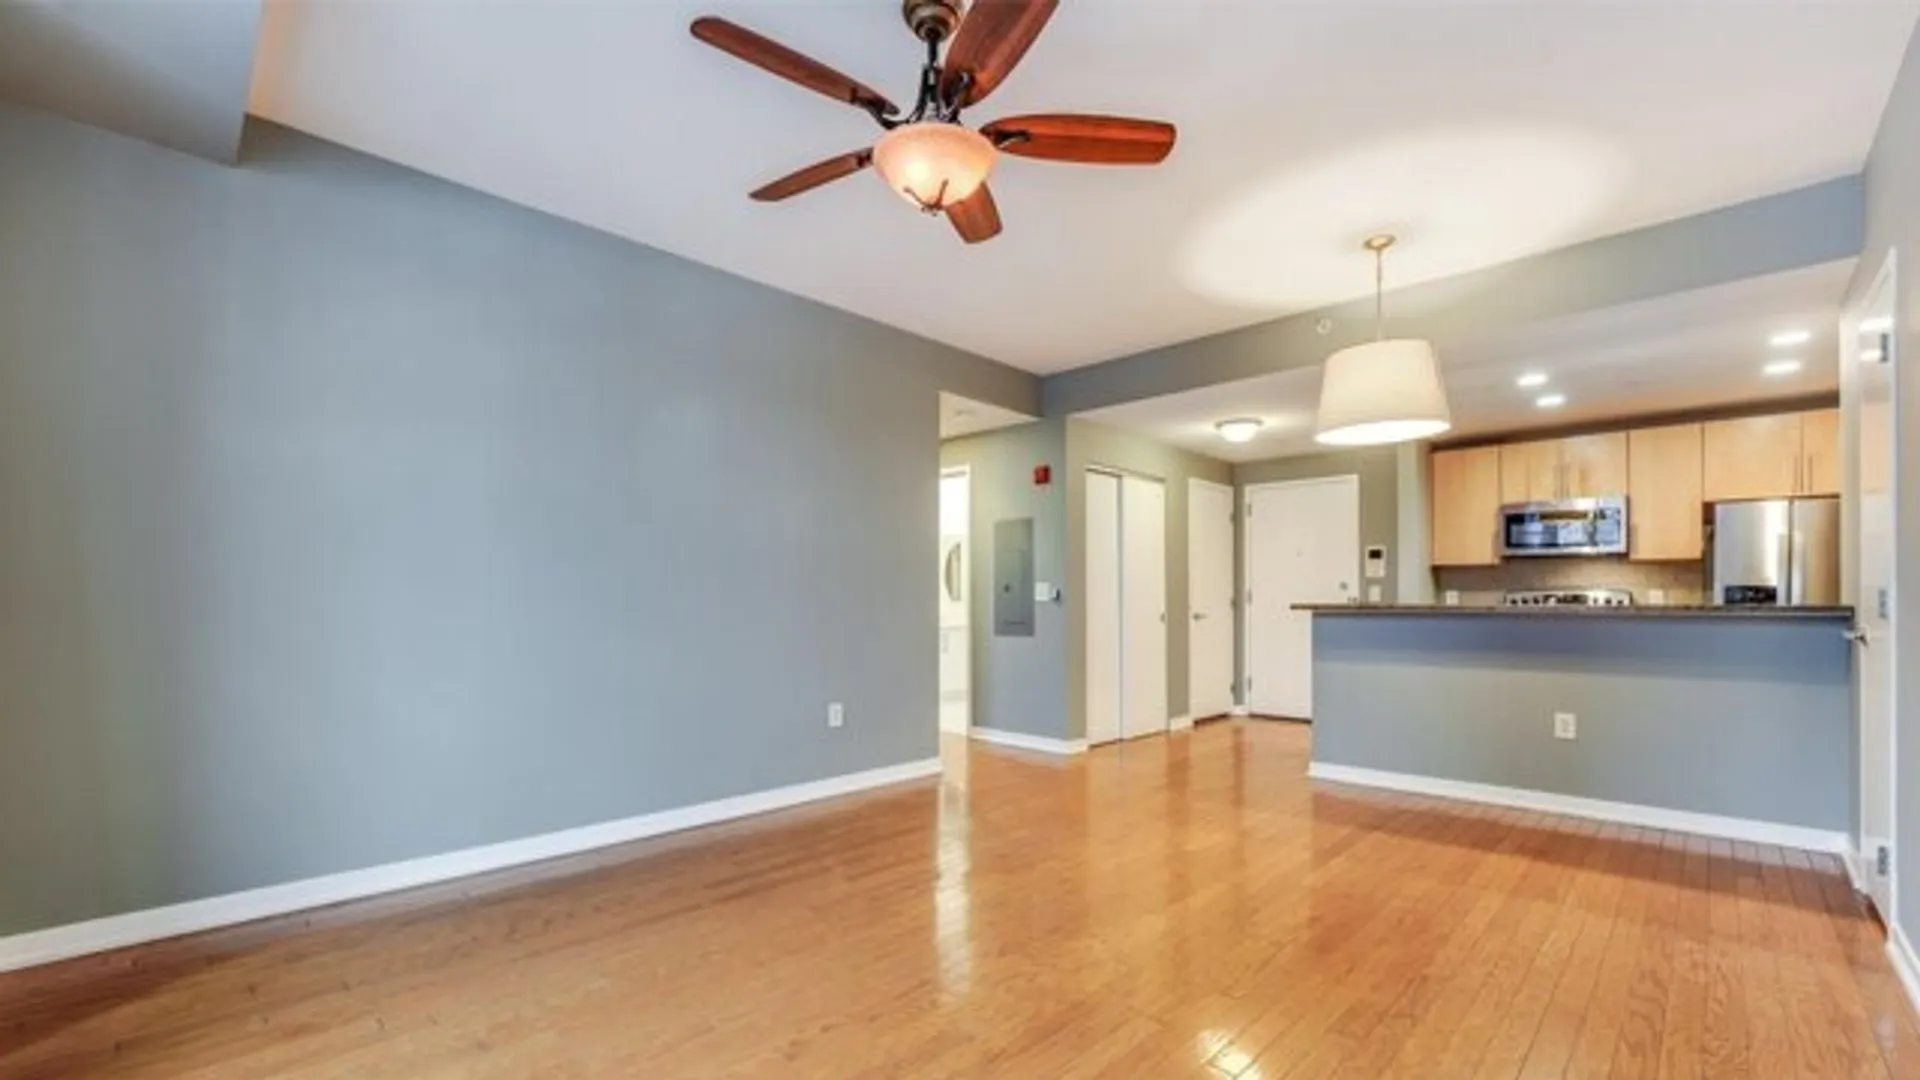 Fulton's Landing, 149 Essex Street, Jersey City, NJ 07302, USA | 2 bed house for rent